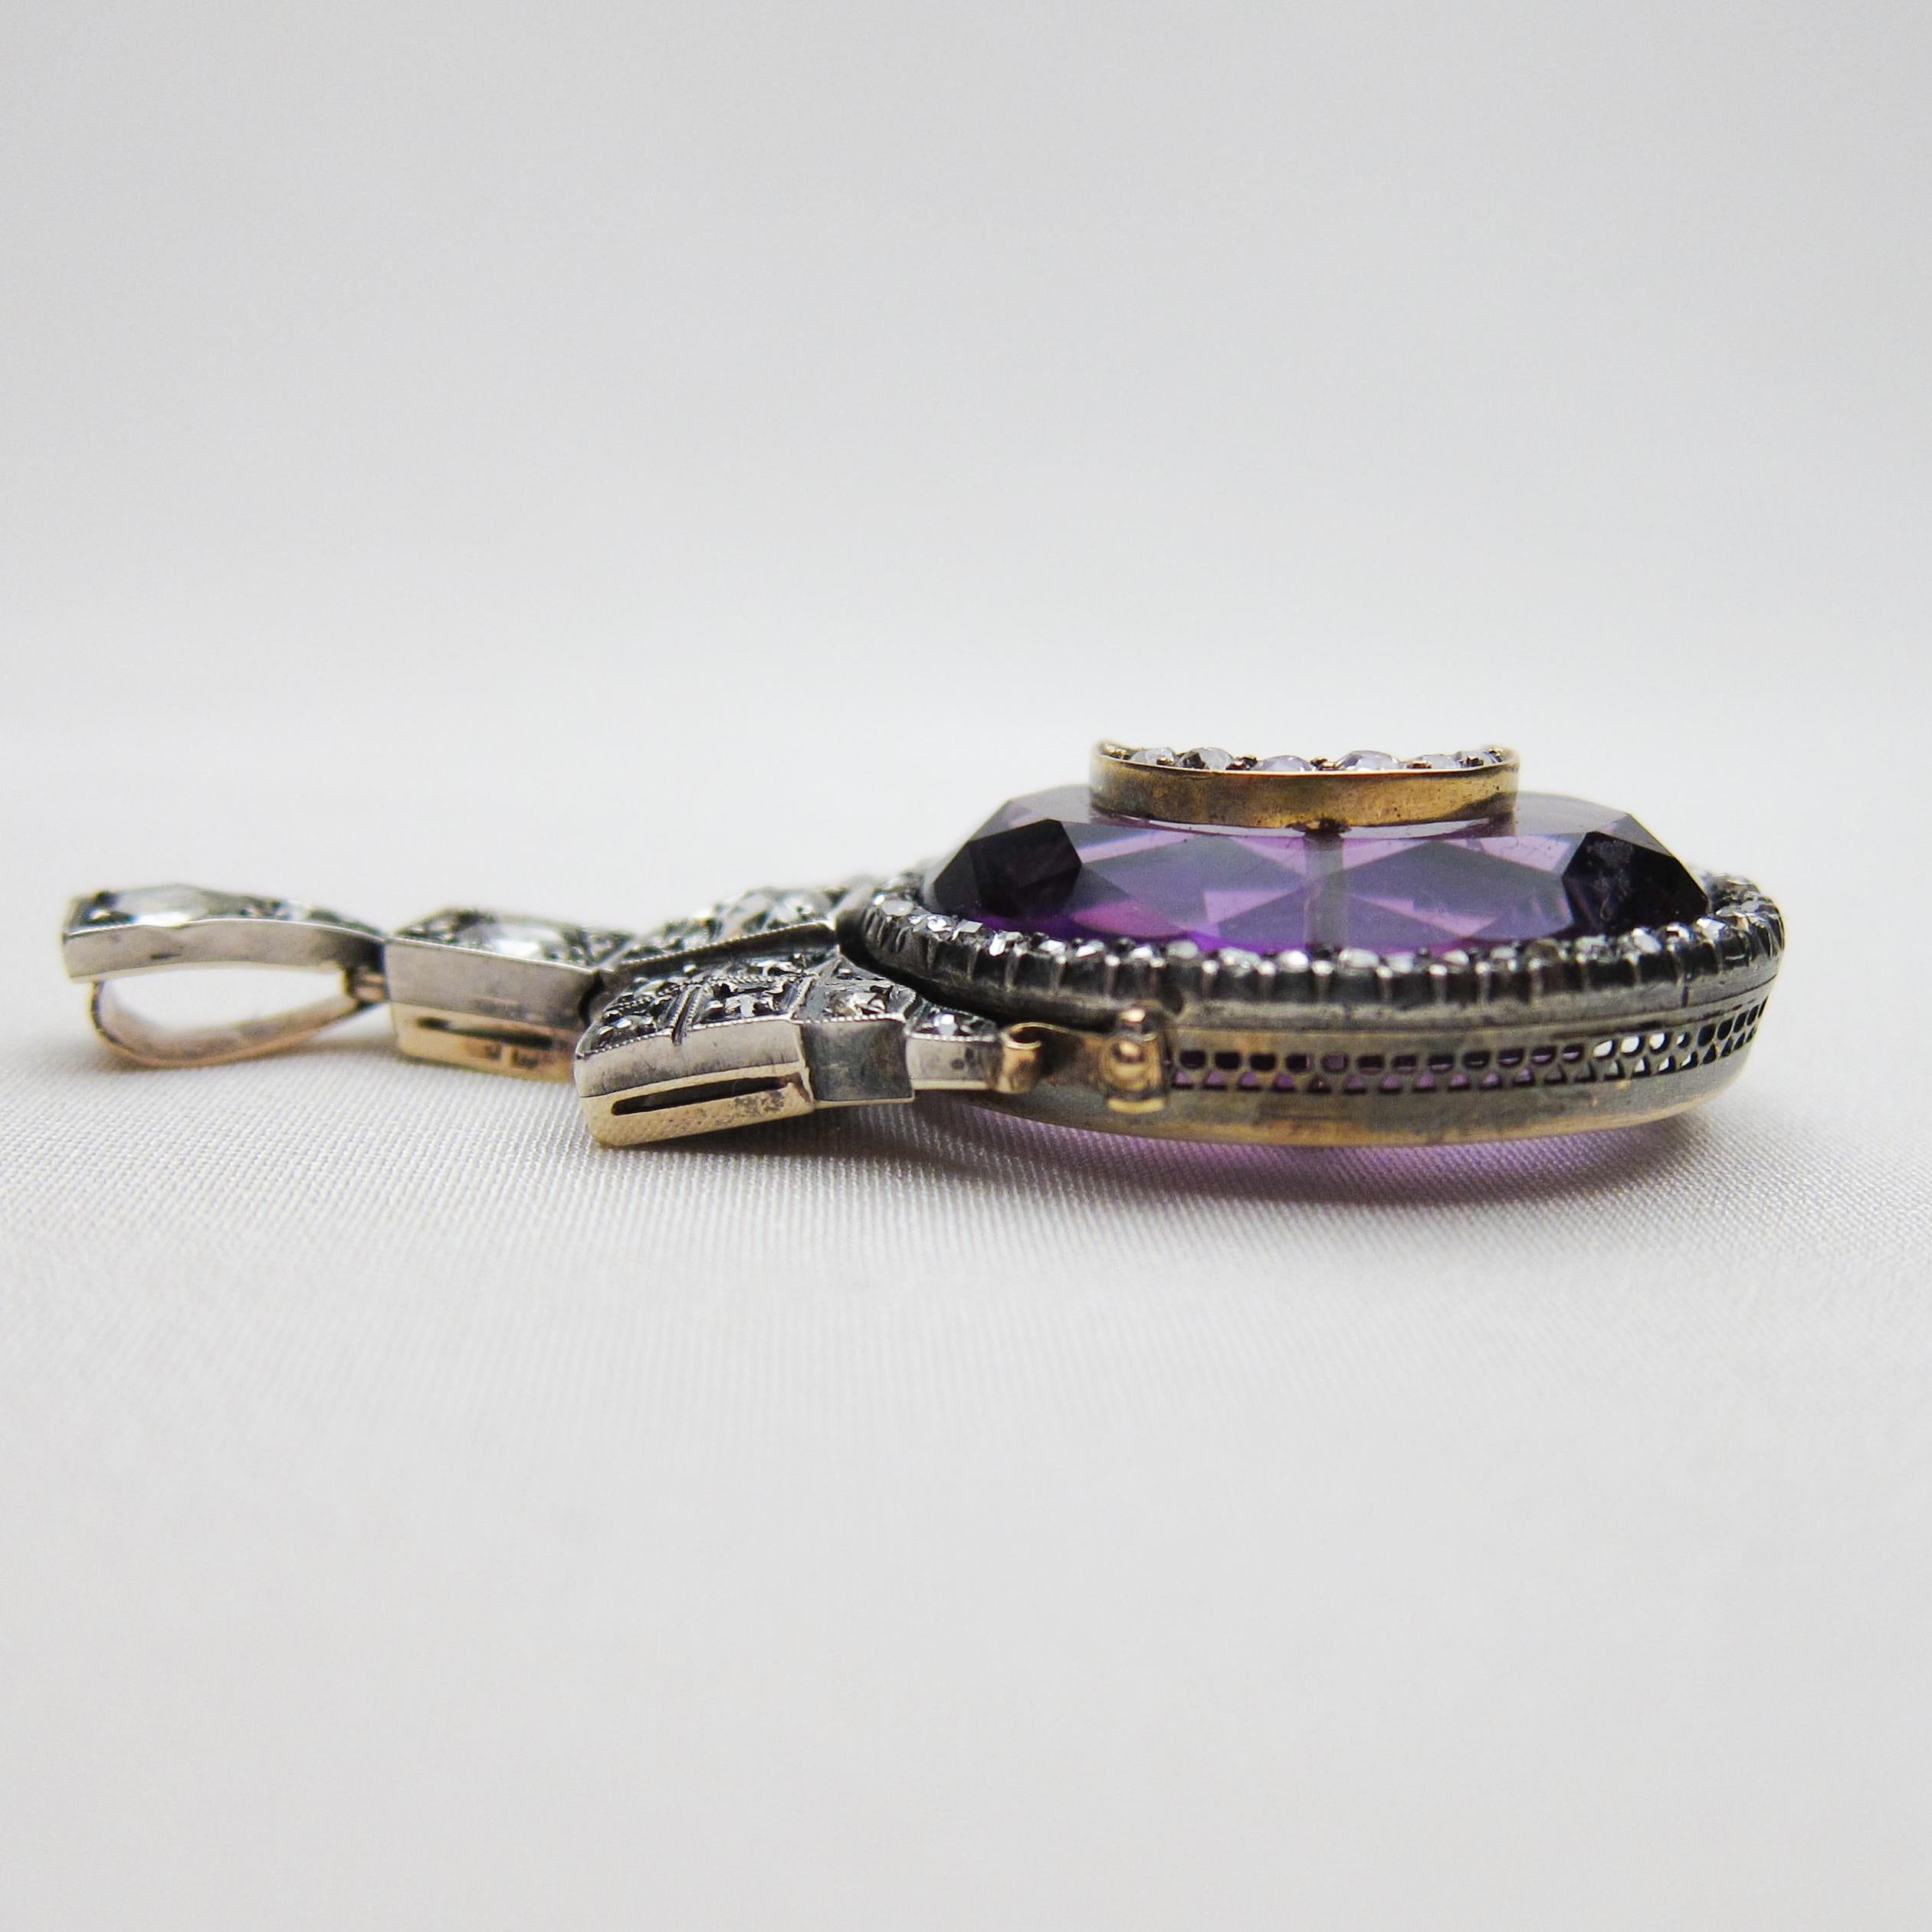 Circa 1850. This gorgeous Georgian pendant features a 29.71 carat mixed-cut natural amethyst set in sterling silver-topped 14KT gold and accented with a diamond crescent moon. The amethyst is surrounded with 52 rose-cut diamonds, while the top of